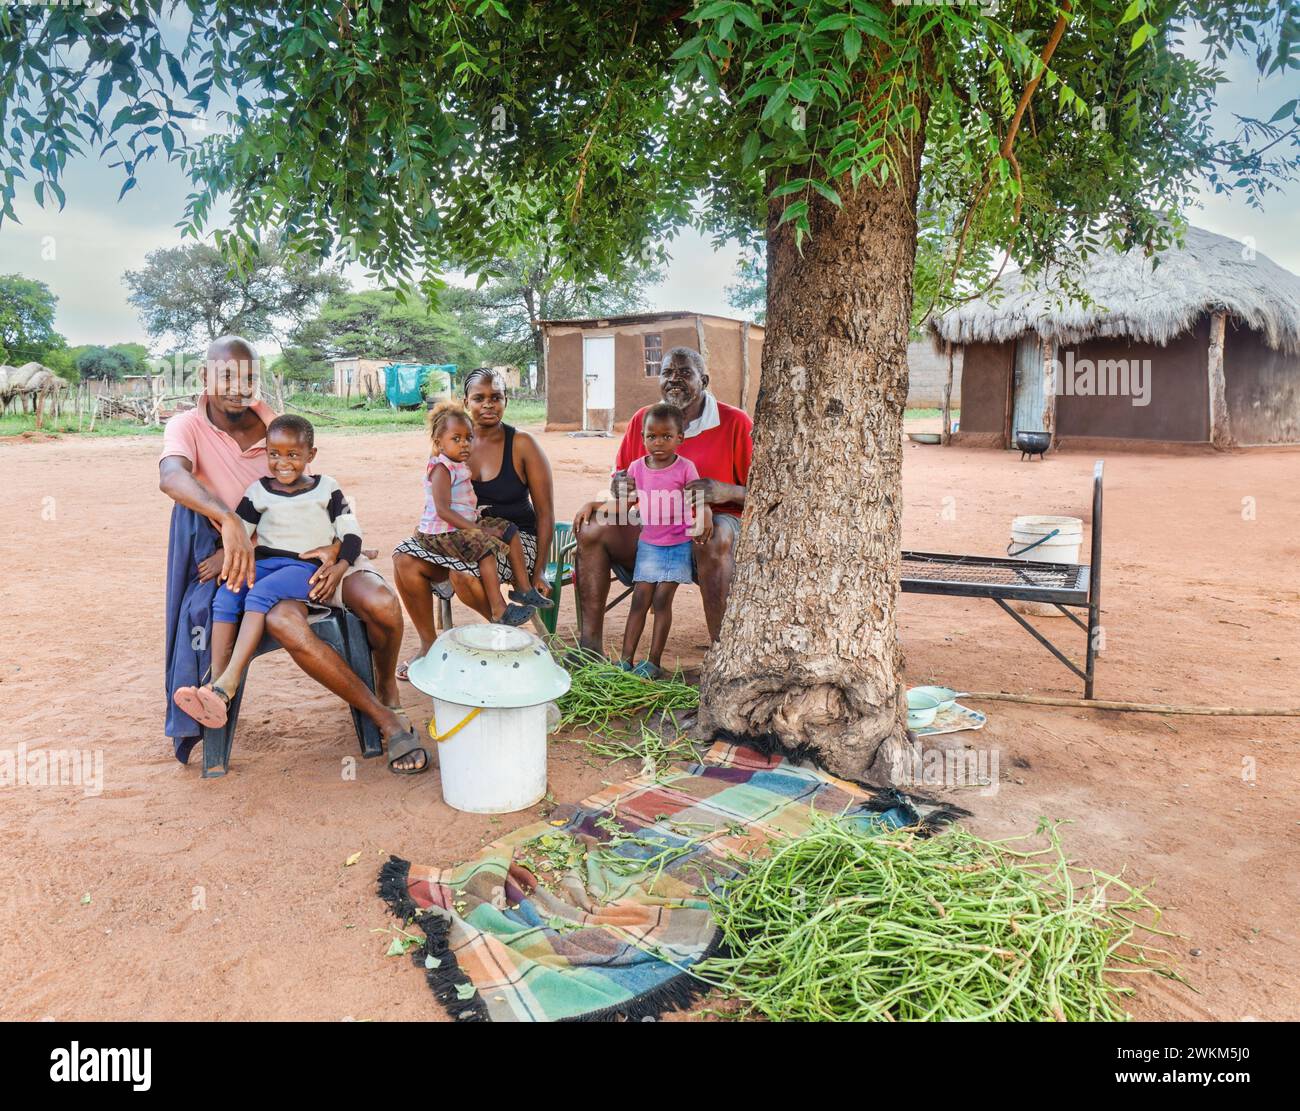 village happy extended multi generation african family , sited on chairs in the outdoors kitchen, in front of the mud hut with thatched roof Stock Photo